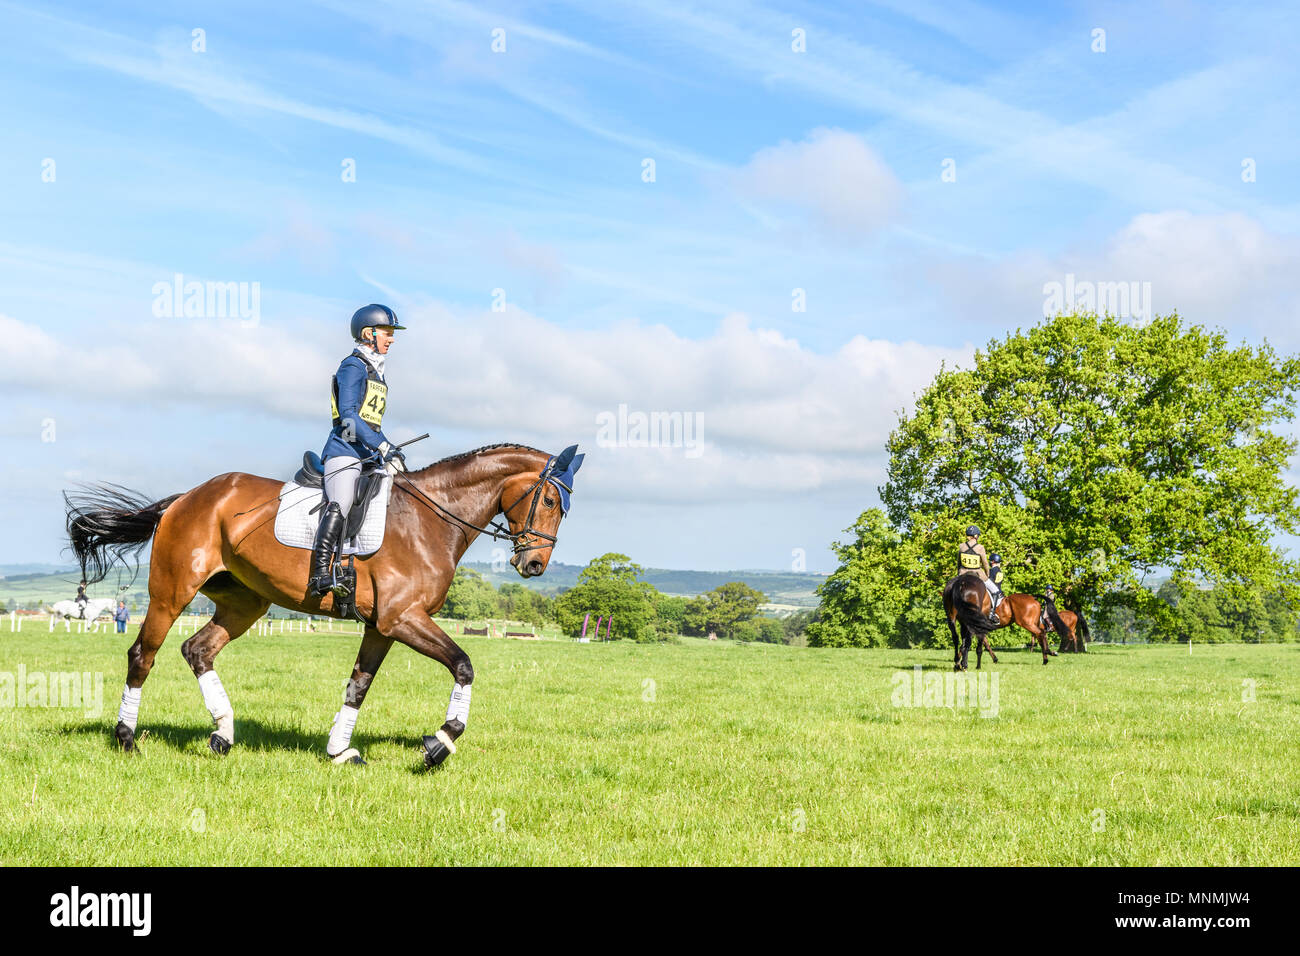 Corby, England. 18th May 2018. The horse Cierrai and rider Christina Henriksen take part in the dressage event during the international horse trials at the park of Rockingham Castle, Corby, England on 18 May 2018. Credit: Michael Foley/Alamy Live News Stock Photo